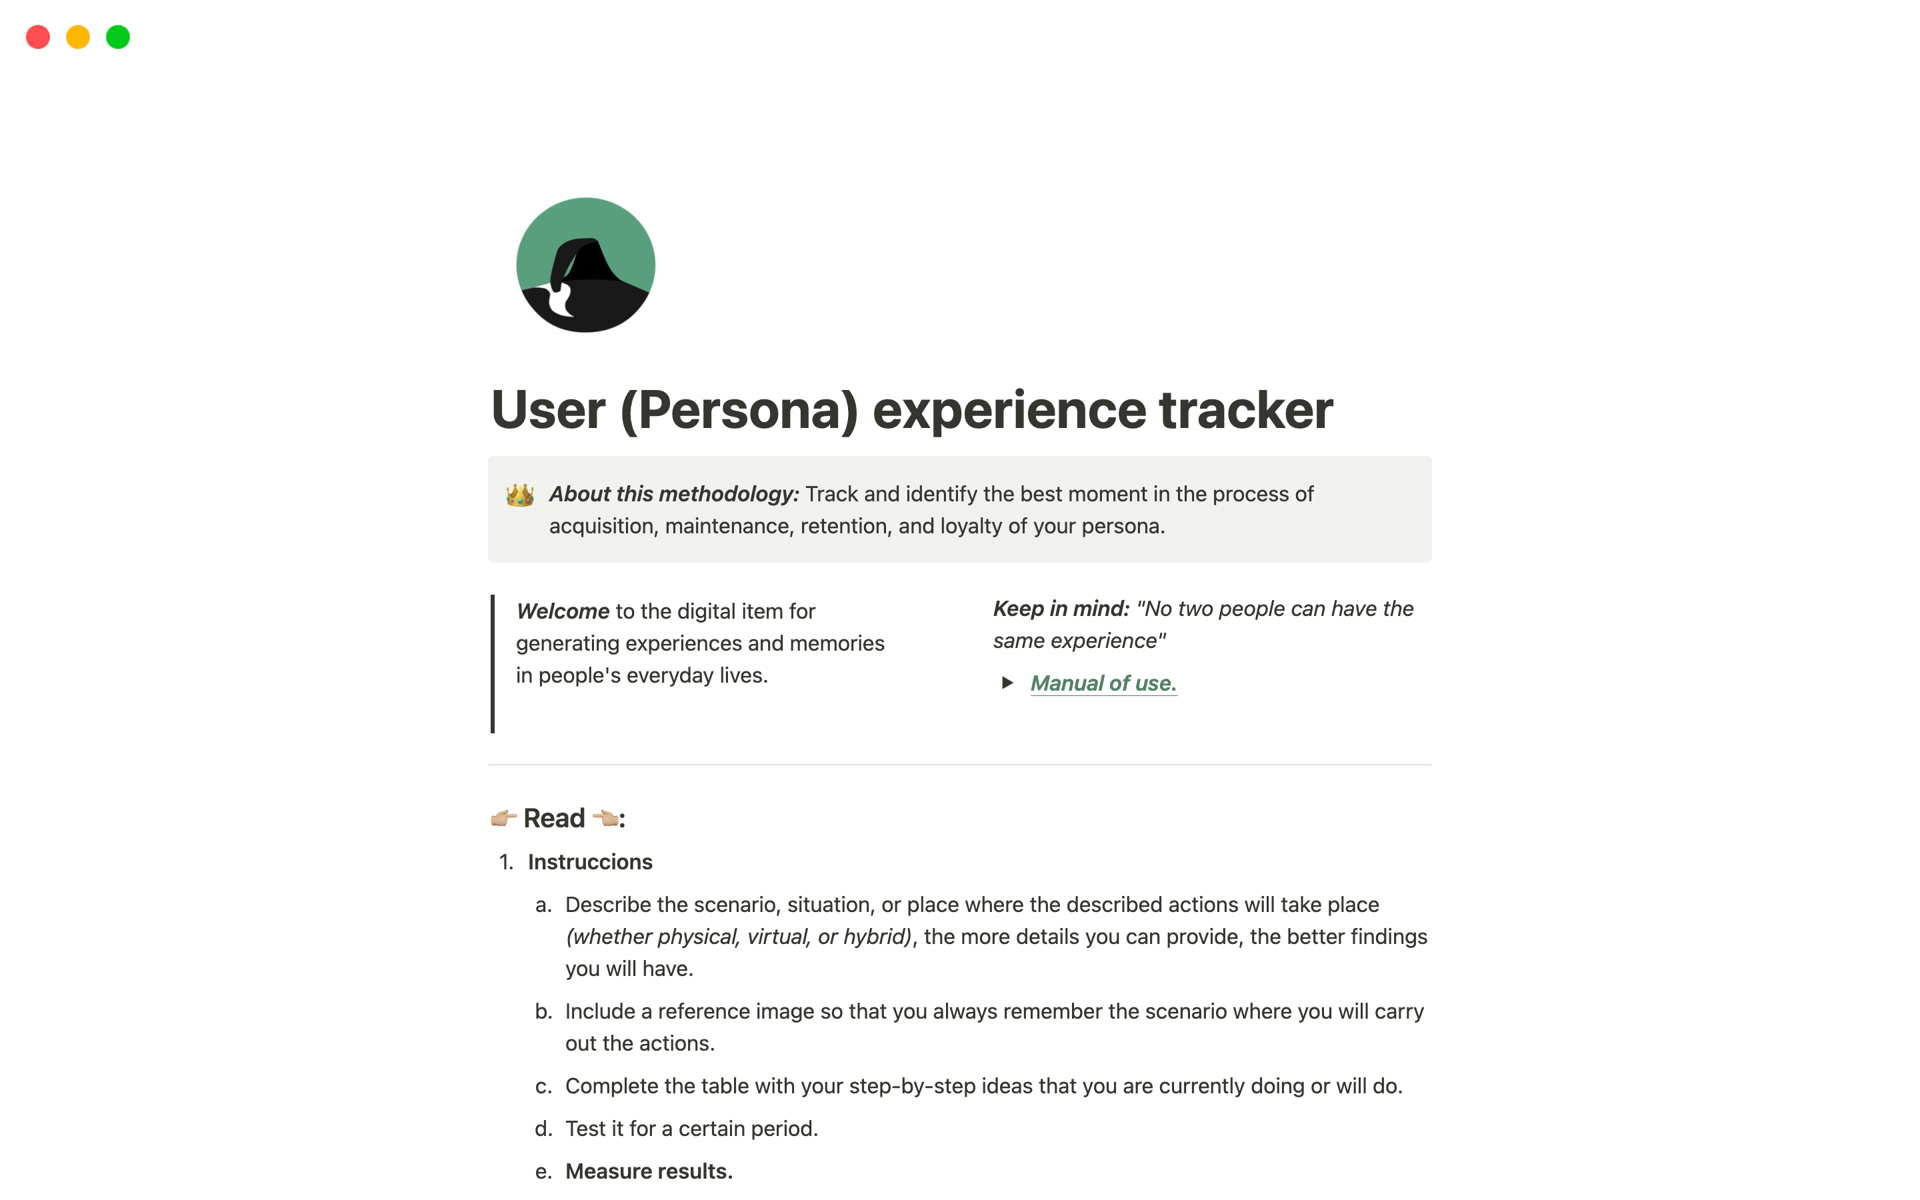 Screenshot of Best 10 Customer Discovery Templates for Account Managers collection by Notion